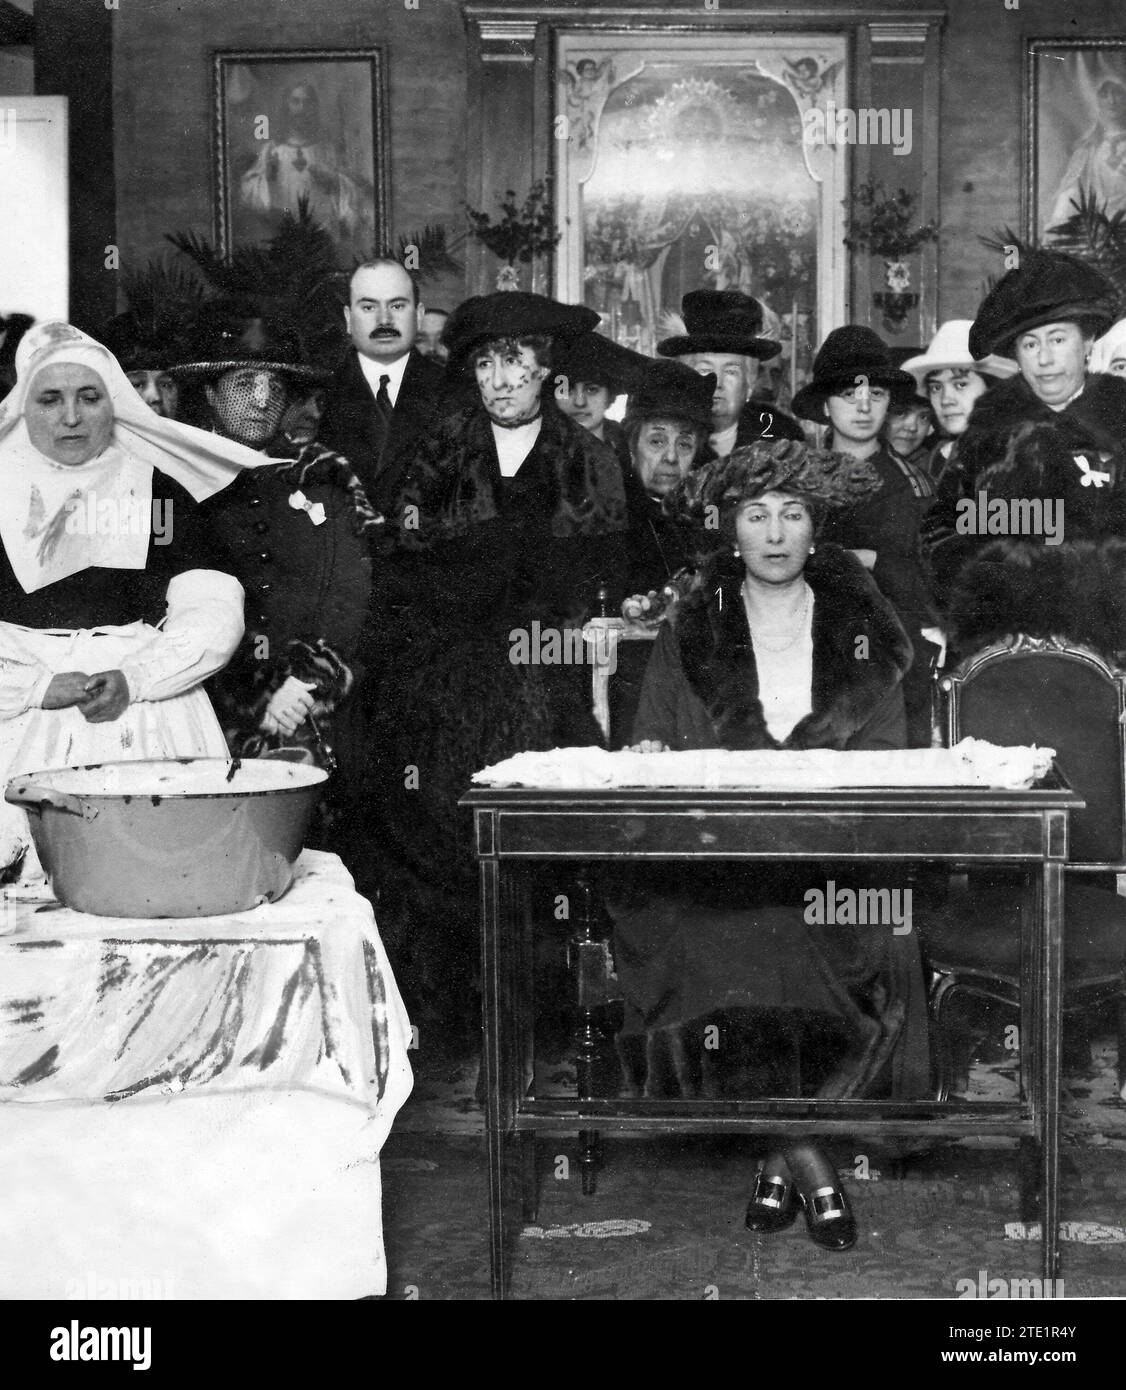 01/20/1919. In the hospital of our Lady of Carmen, in Madrid. HM the Queen (1), Accompanied by HRH the Infanta Isabel (2) and Other Aristocratic Ladies, Presiding over the distribution of food to the Poor. Credit: Album / Archivo ABC / Ramón Alba Stock Photo